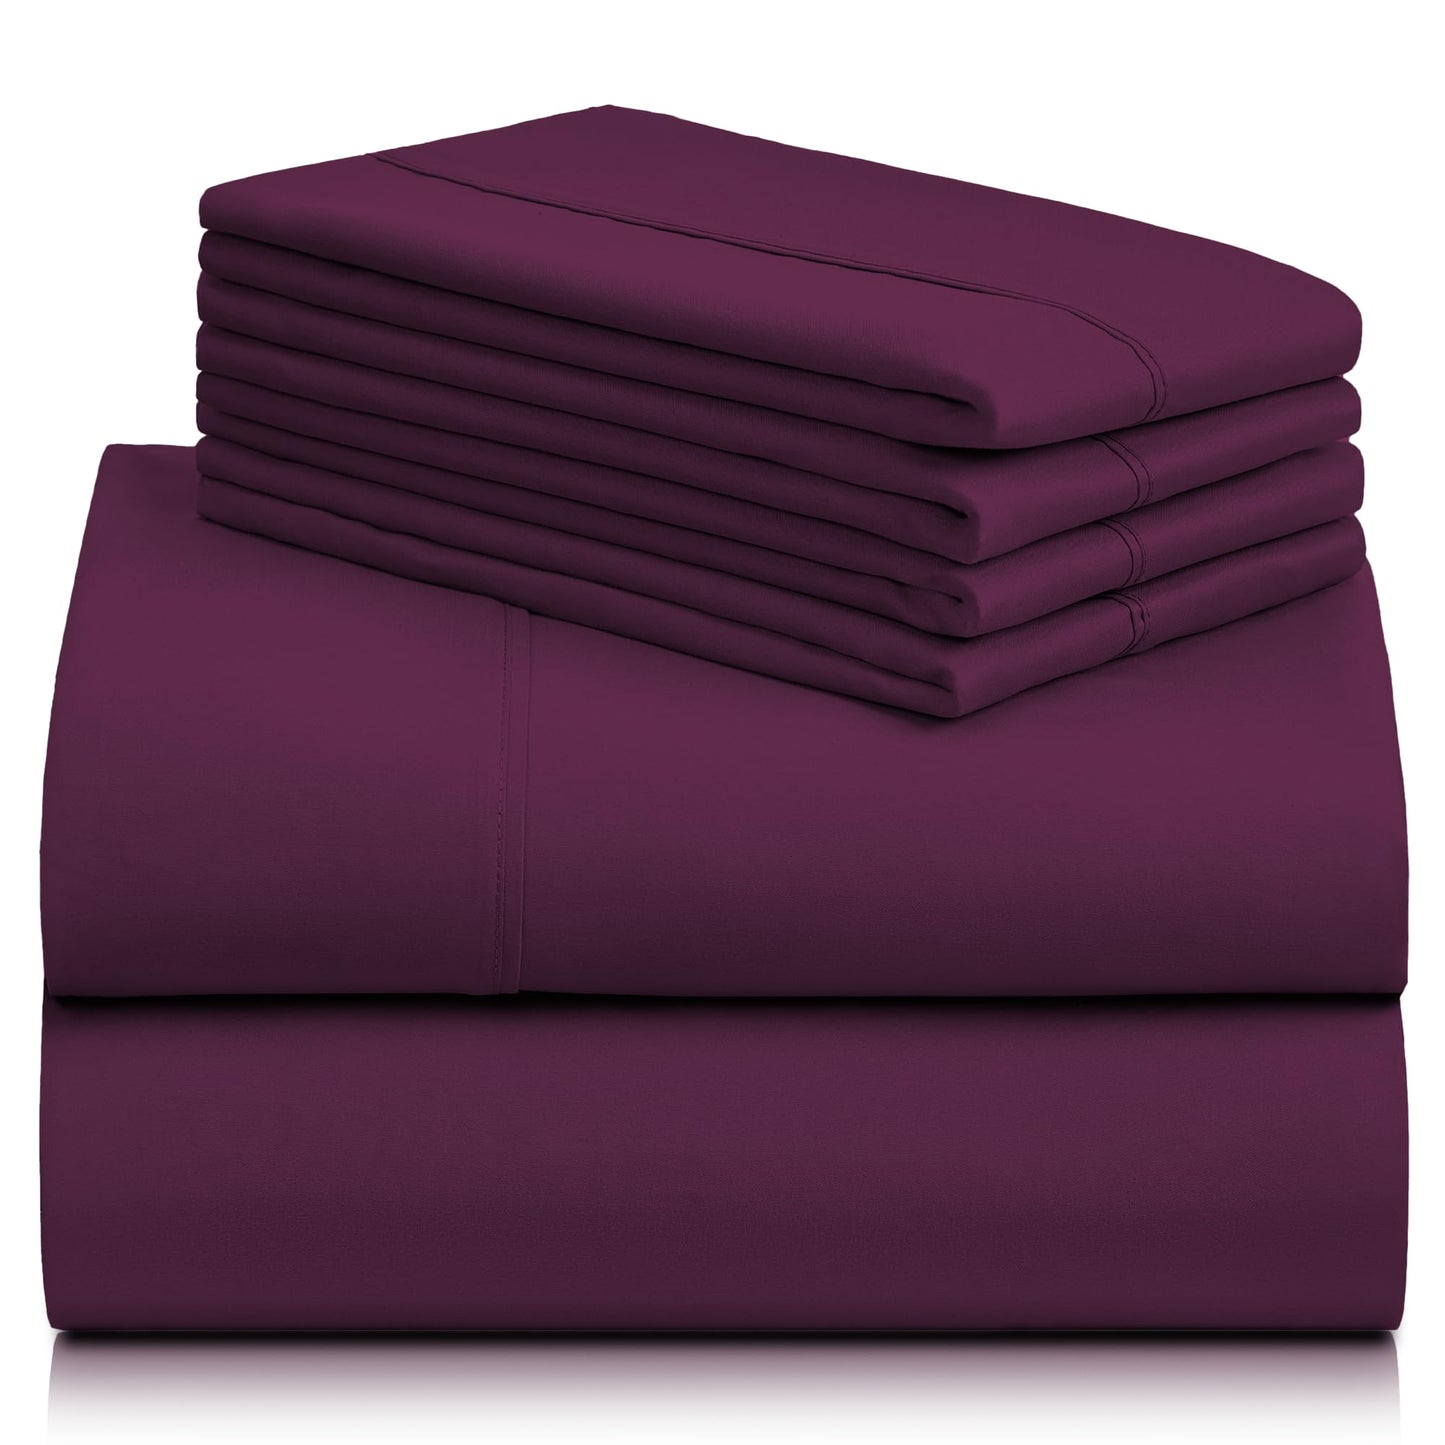 LuxClub 6 PC King Sheet Set, Breathable Luxury Bed Sheets, Deep Pockets 18" Wrinkle Free Cooling Bed Sheets Machine Washable Hotel Bedding Silky Soft - Eggplant King